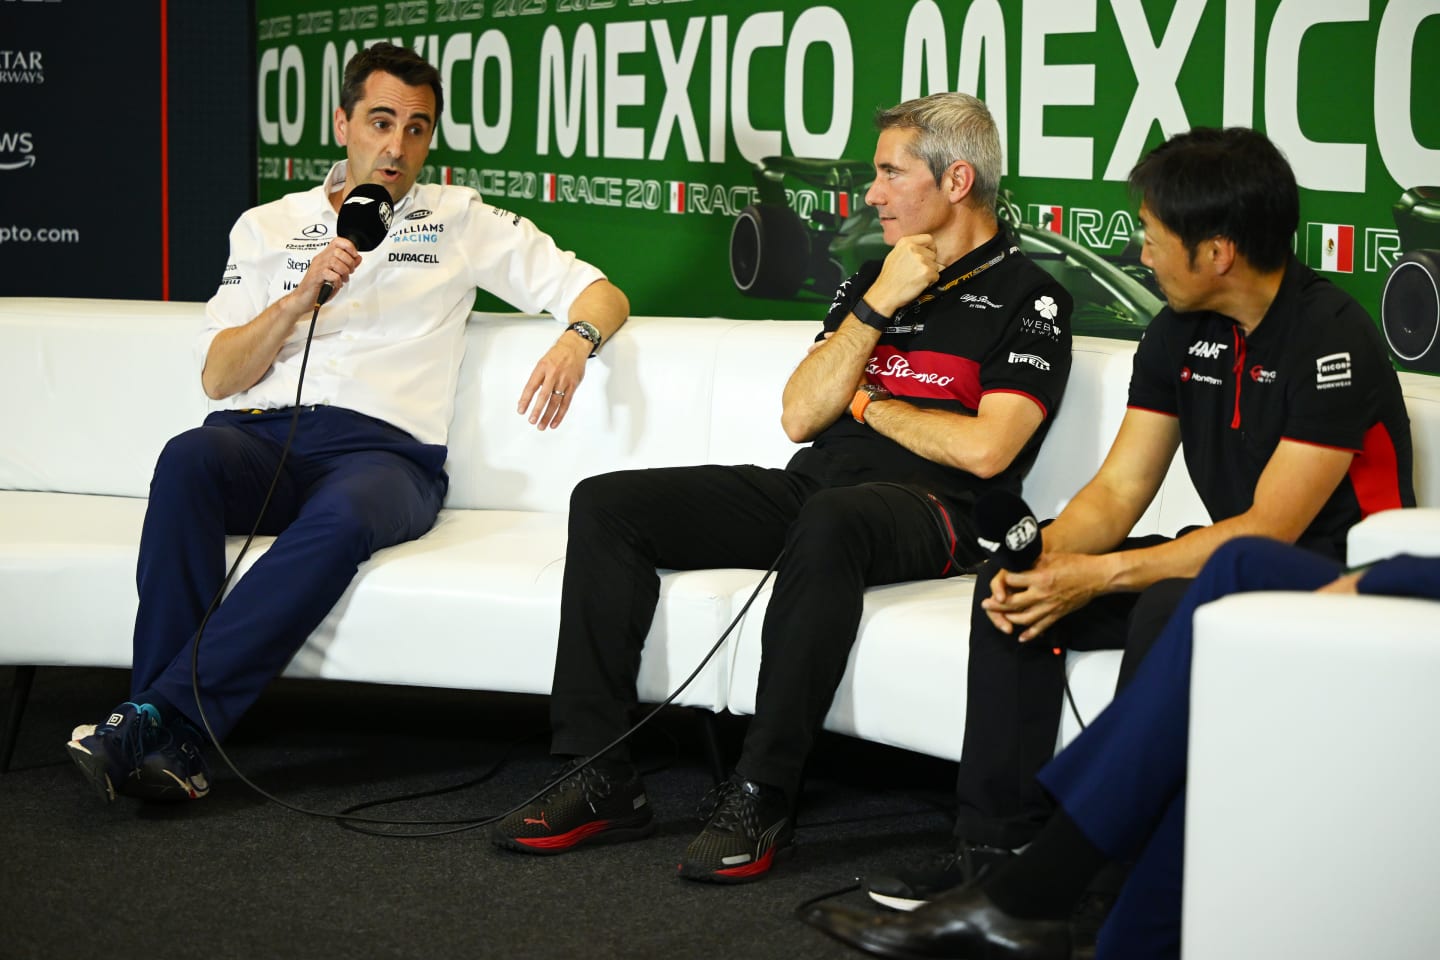 MEXICO CITY, MEXICO - OCTOBER 27: Dave Robson, Head of Vehicle Performance at Williams, Xevi Pujolar, Race Director at Alfa Romeo F1 and Ayao Komatsu, Trackside Engineering Director at Haas F1 attend the Team Principals Press Conference during practice ahead of the F1 Grand Prix of Mexico at Autodromo Hermanos Rodriguez on October 27, 2023 in Mexico City, Mexico. (Photo by Clive Mason/Getty Images)